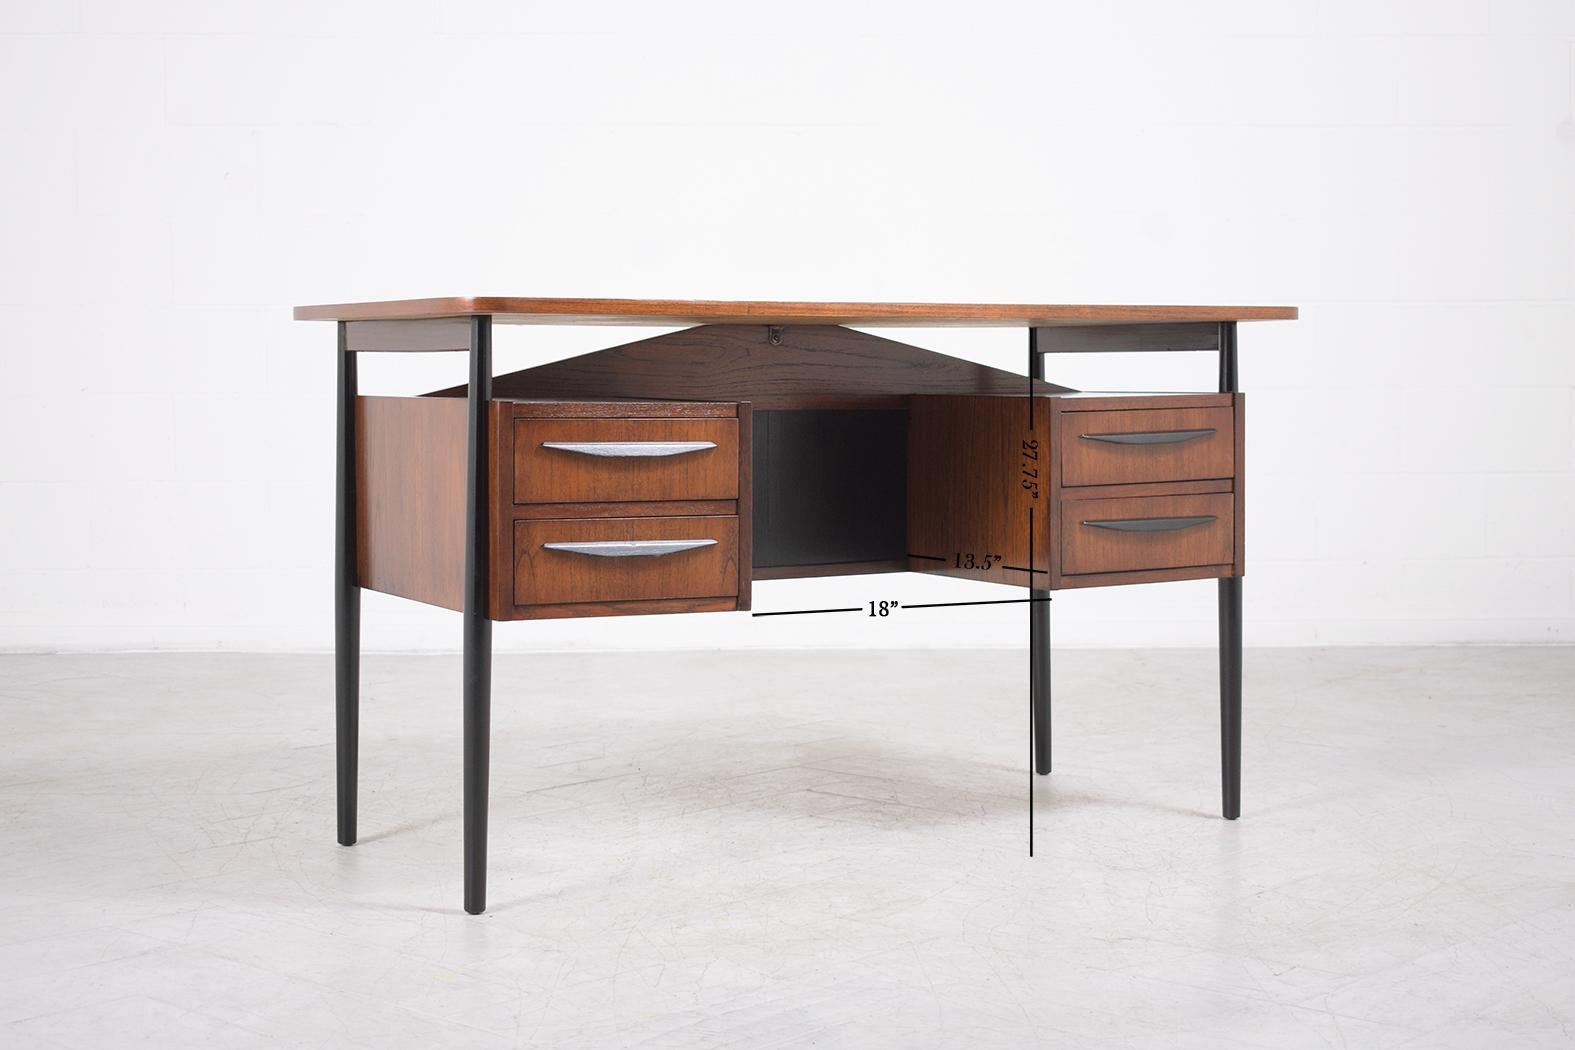 An extraordinary 1960s danish desk in great condition completely restored and refinished by our professional craftsmen team. This sleek mid-century is hand-crafted out of teak wood and has been newly stained in two tones of provincial and ebonized